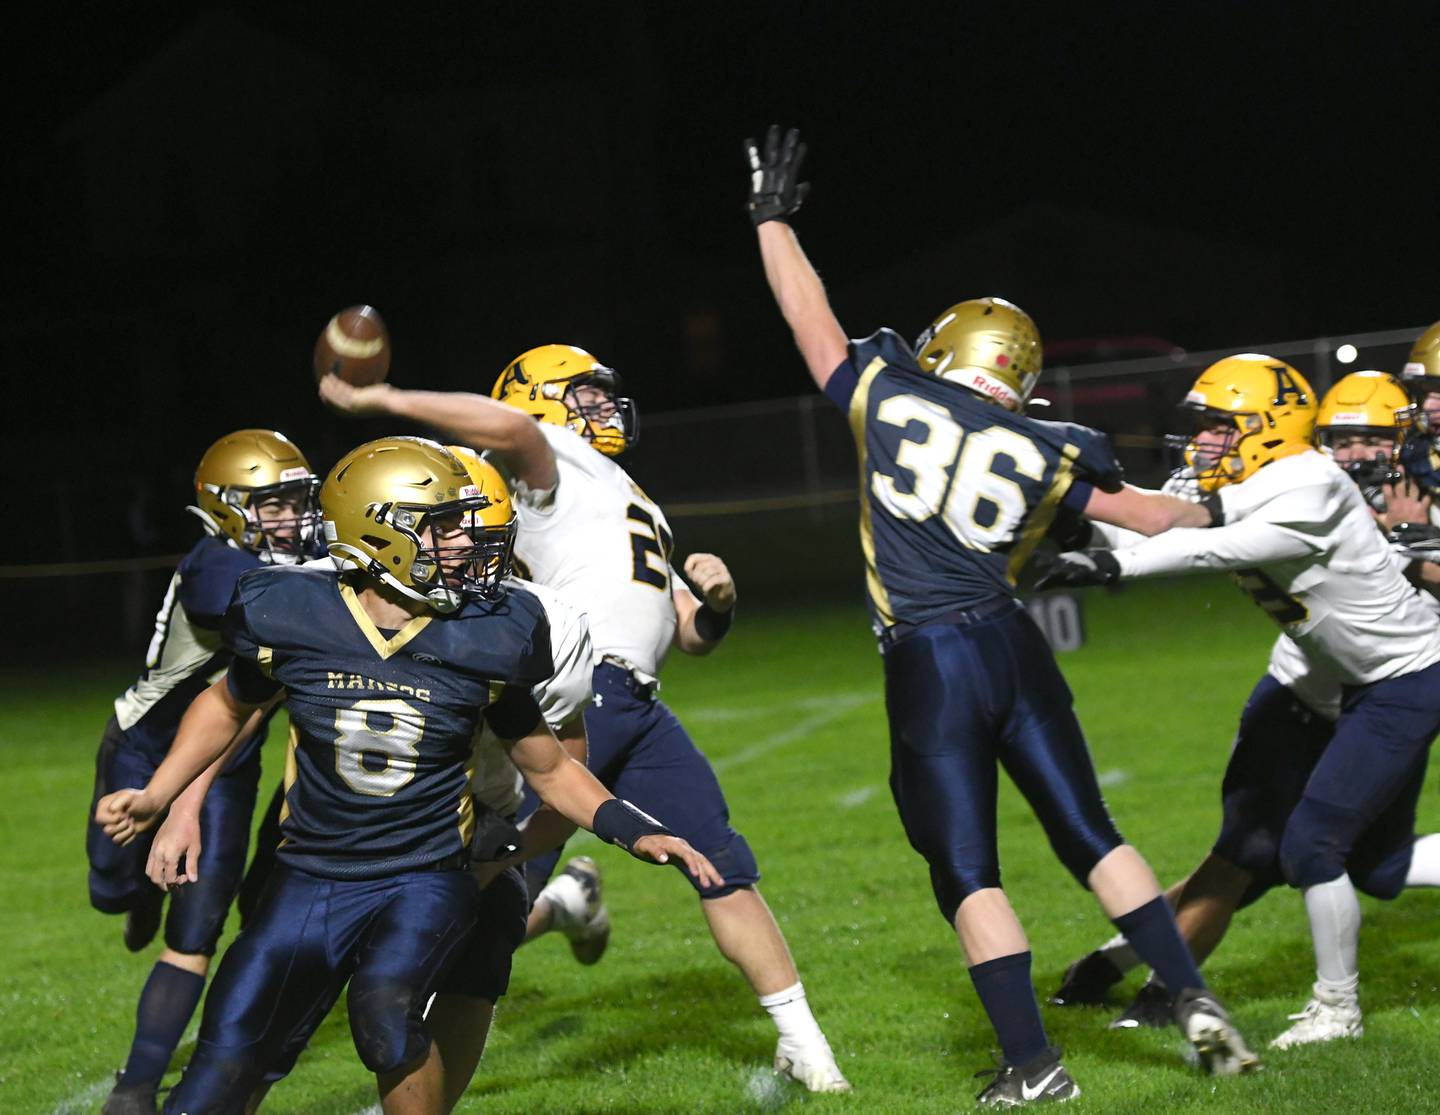 Polo's Wayde Reimer gets a hand in the air as other Marcos surround the Aquin quarterback.